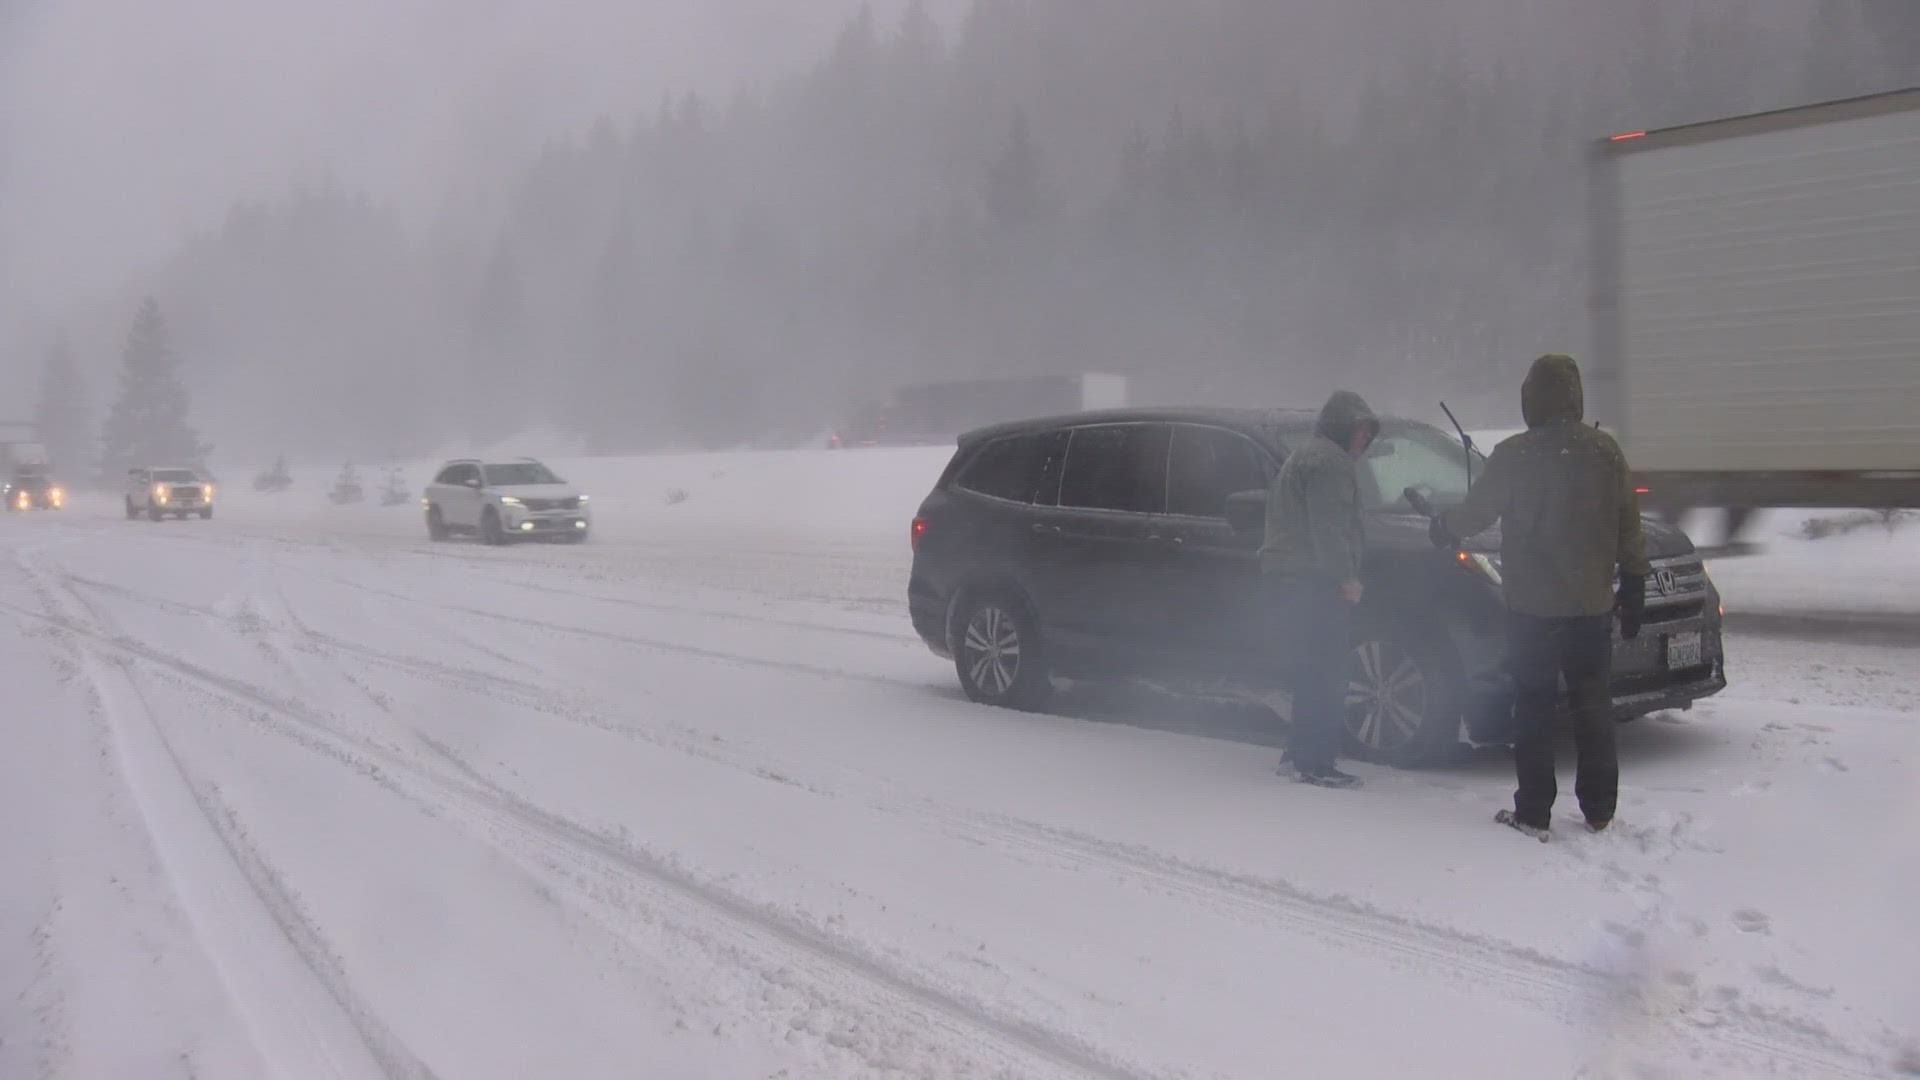 Travel on I-90 has been difficult following a storm that brought snow to the mountains and some lowland areas.